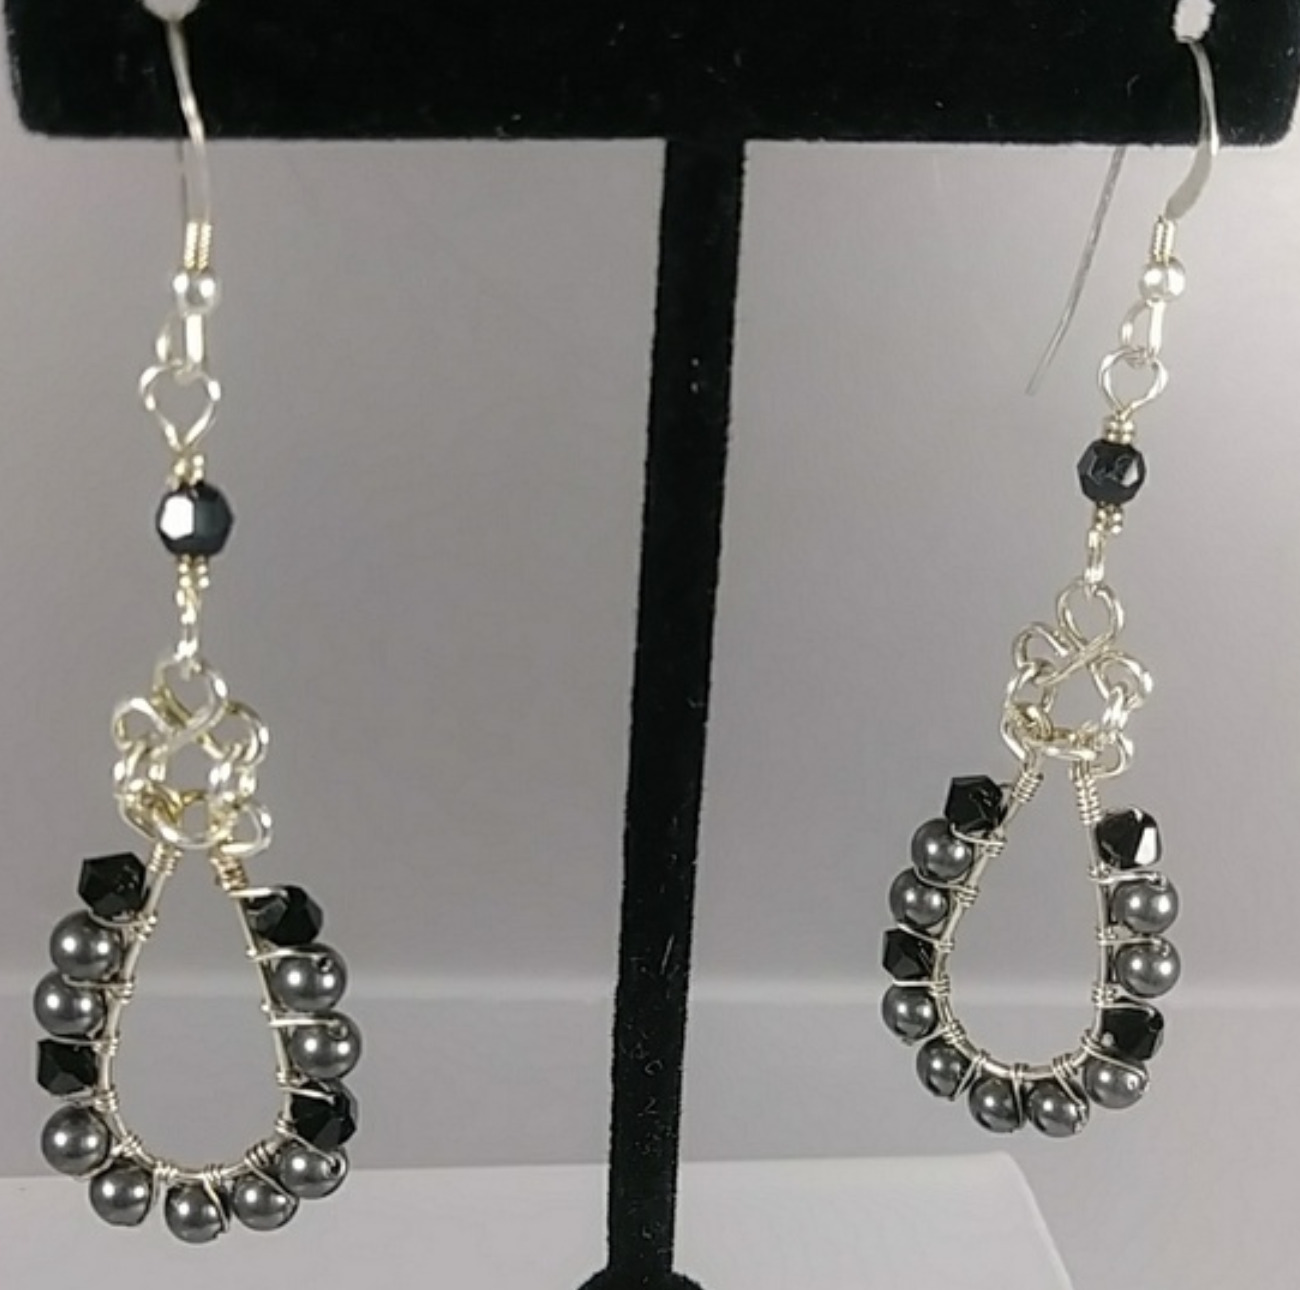 (626 - EAR) - Description: Earrings: Sterling Silver Wire, Swarovski Crystal  and Pearl Beads, Sterling Silver Earwire  Dimension: 2 ' L (Inches﻿)